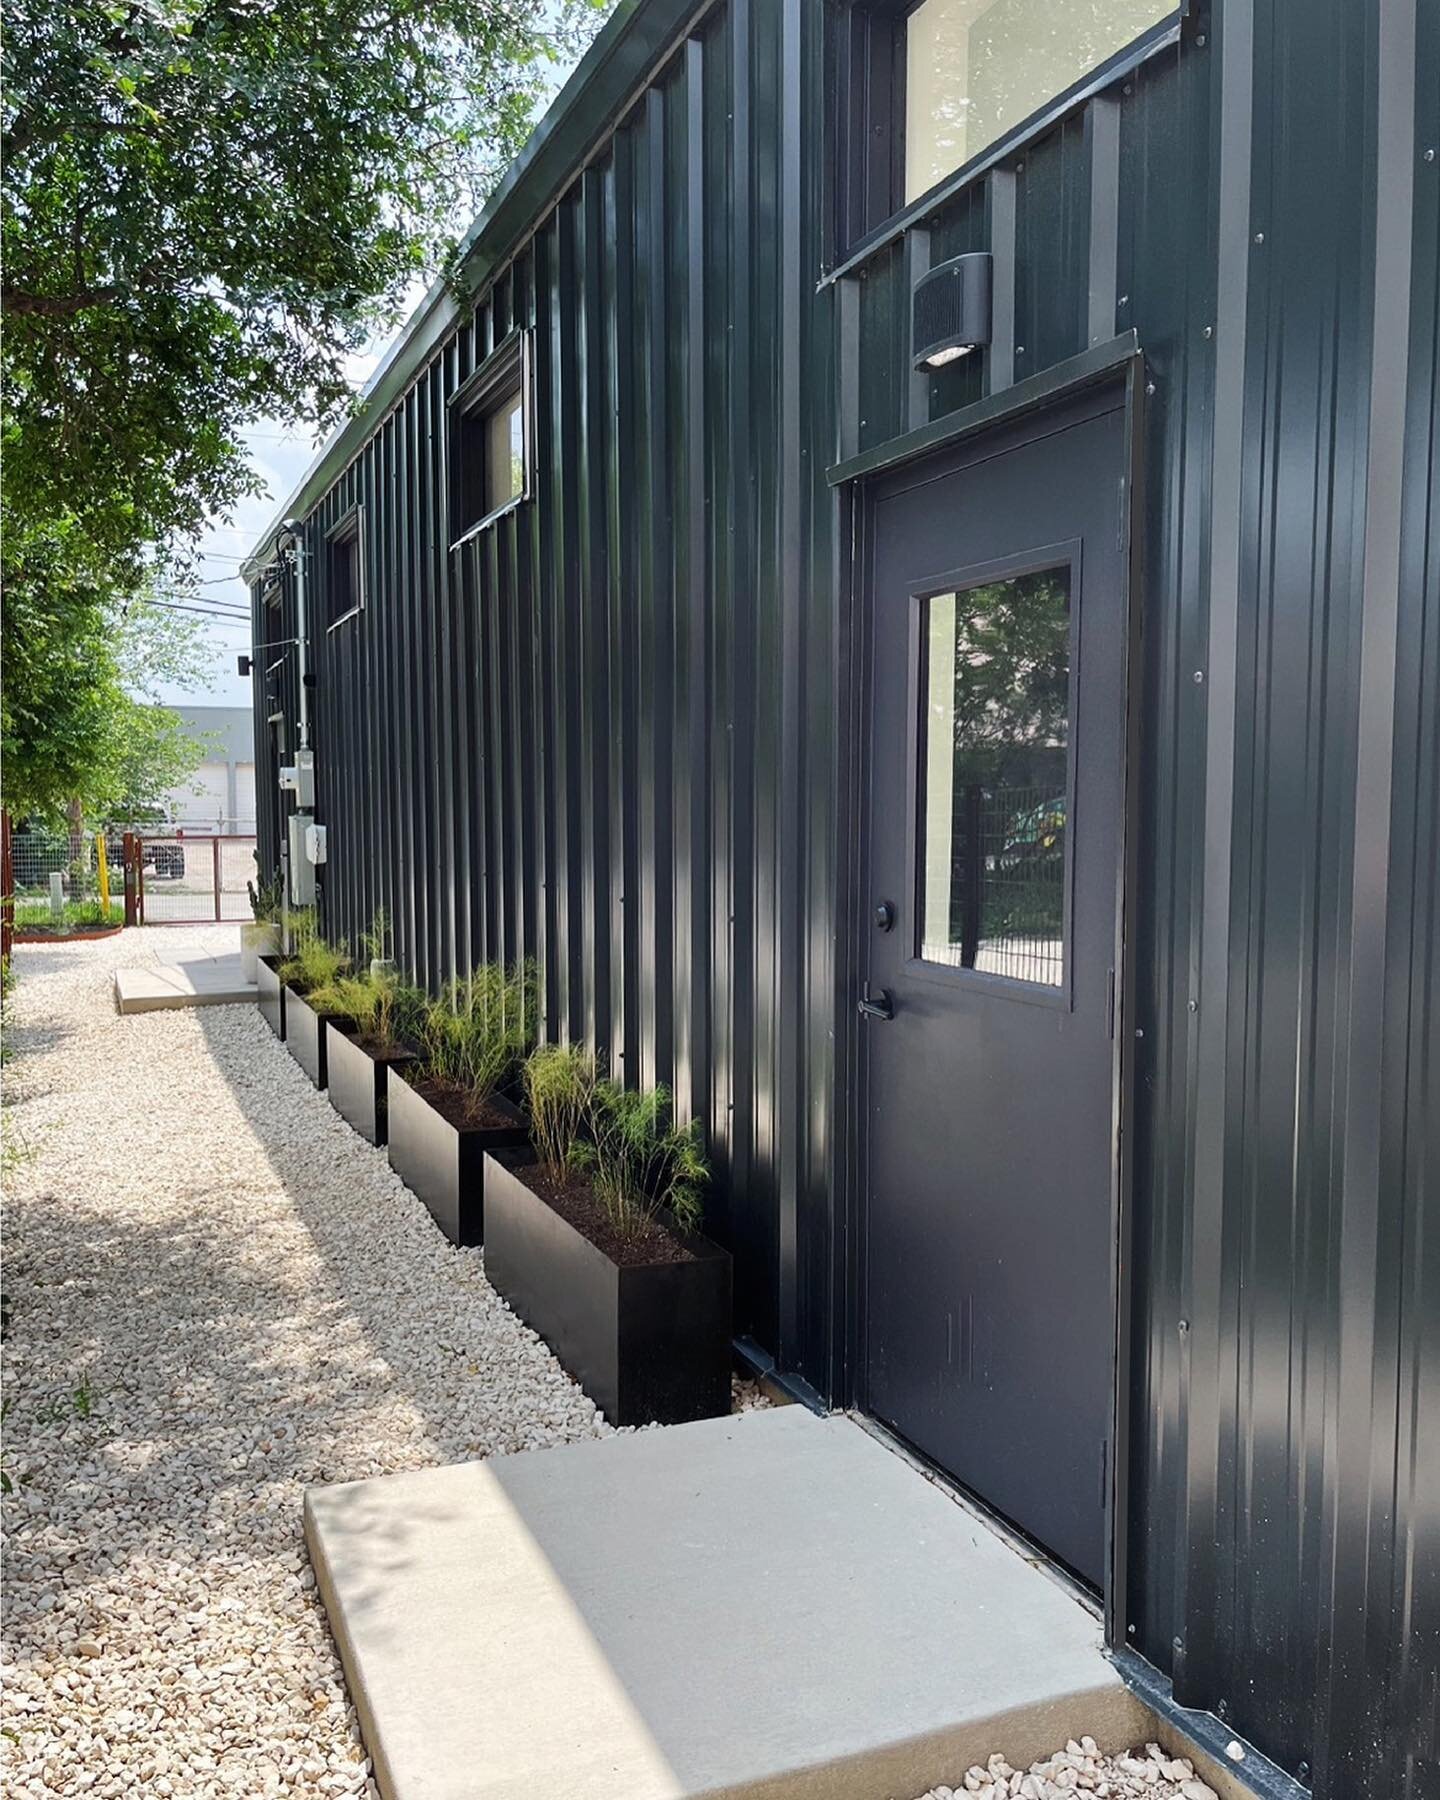 STUDIO AVAILABLE: I&rsquo;ve finished up the landscaping on the new lot and the back studio is available now. It&rsquo;s a private, quiet workspace with bathroom, gated parking and is just a few blocks from downtown. This space is perfect for an arti